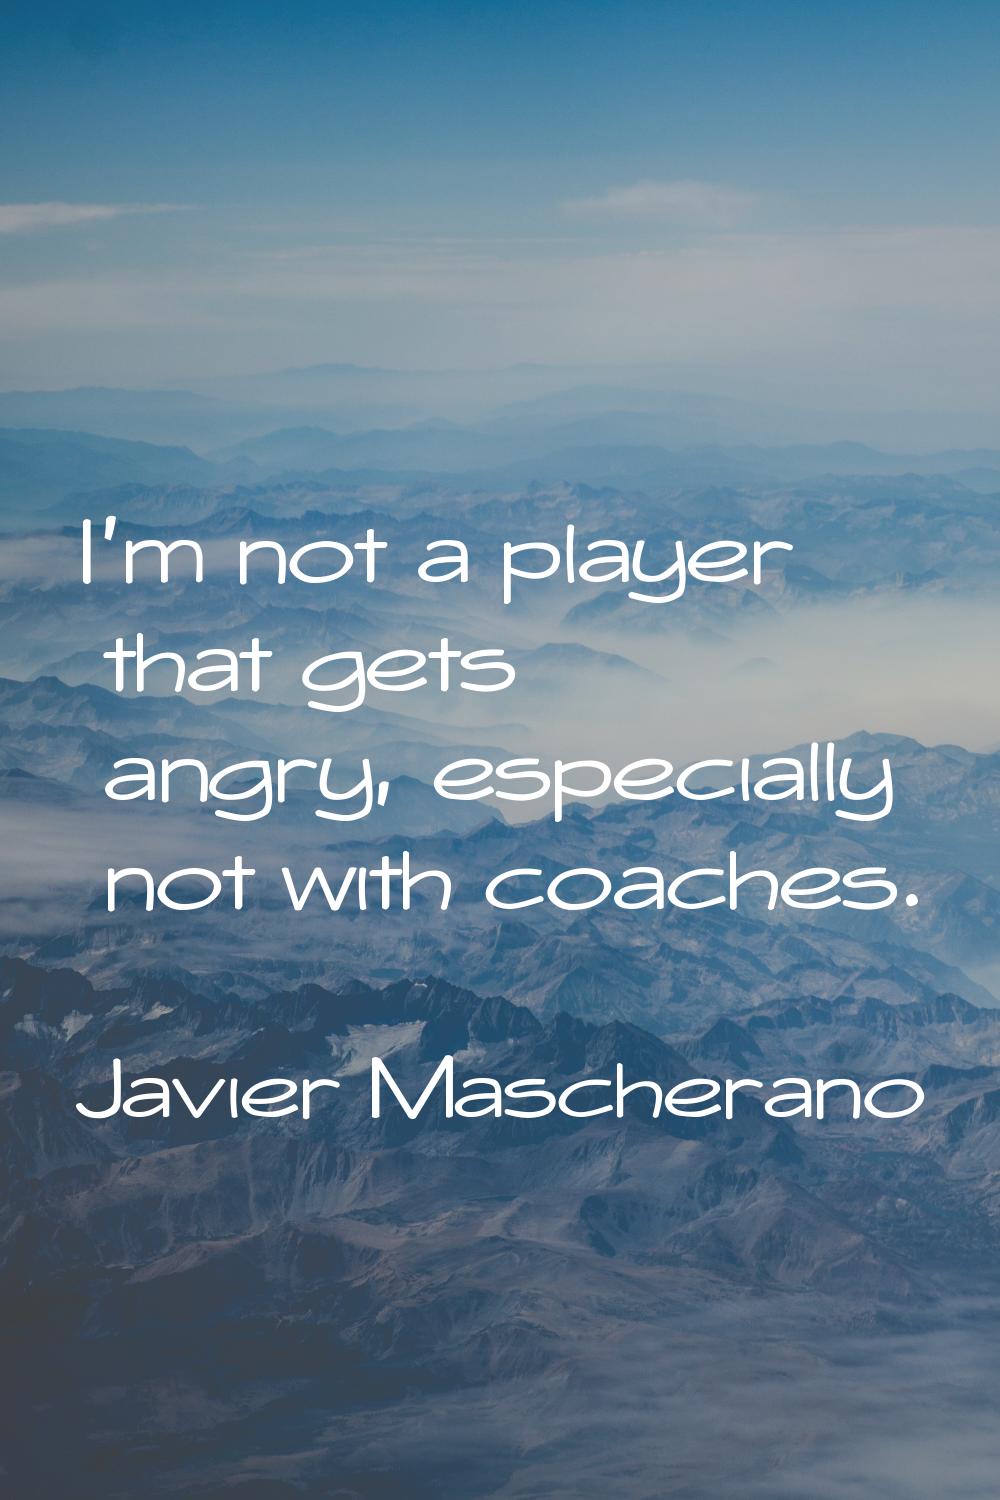 I'm not a player that gets angry, especially not with coaches.